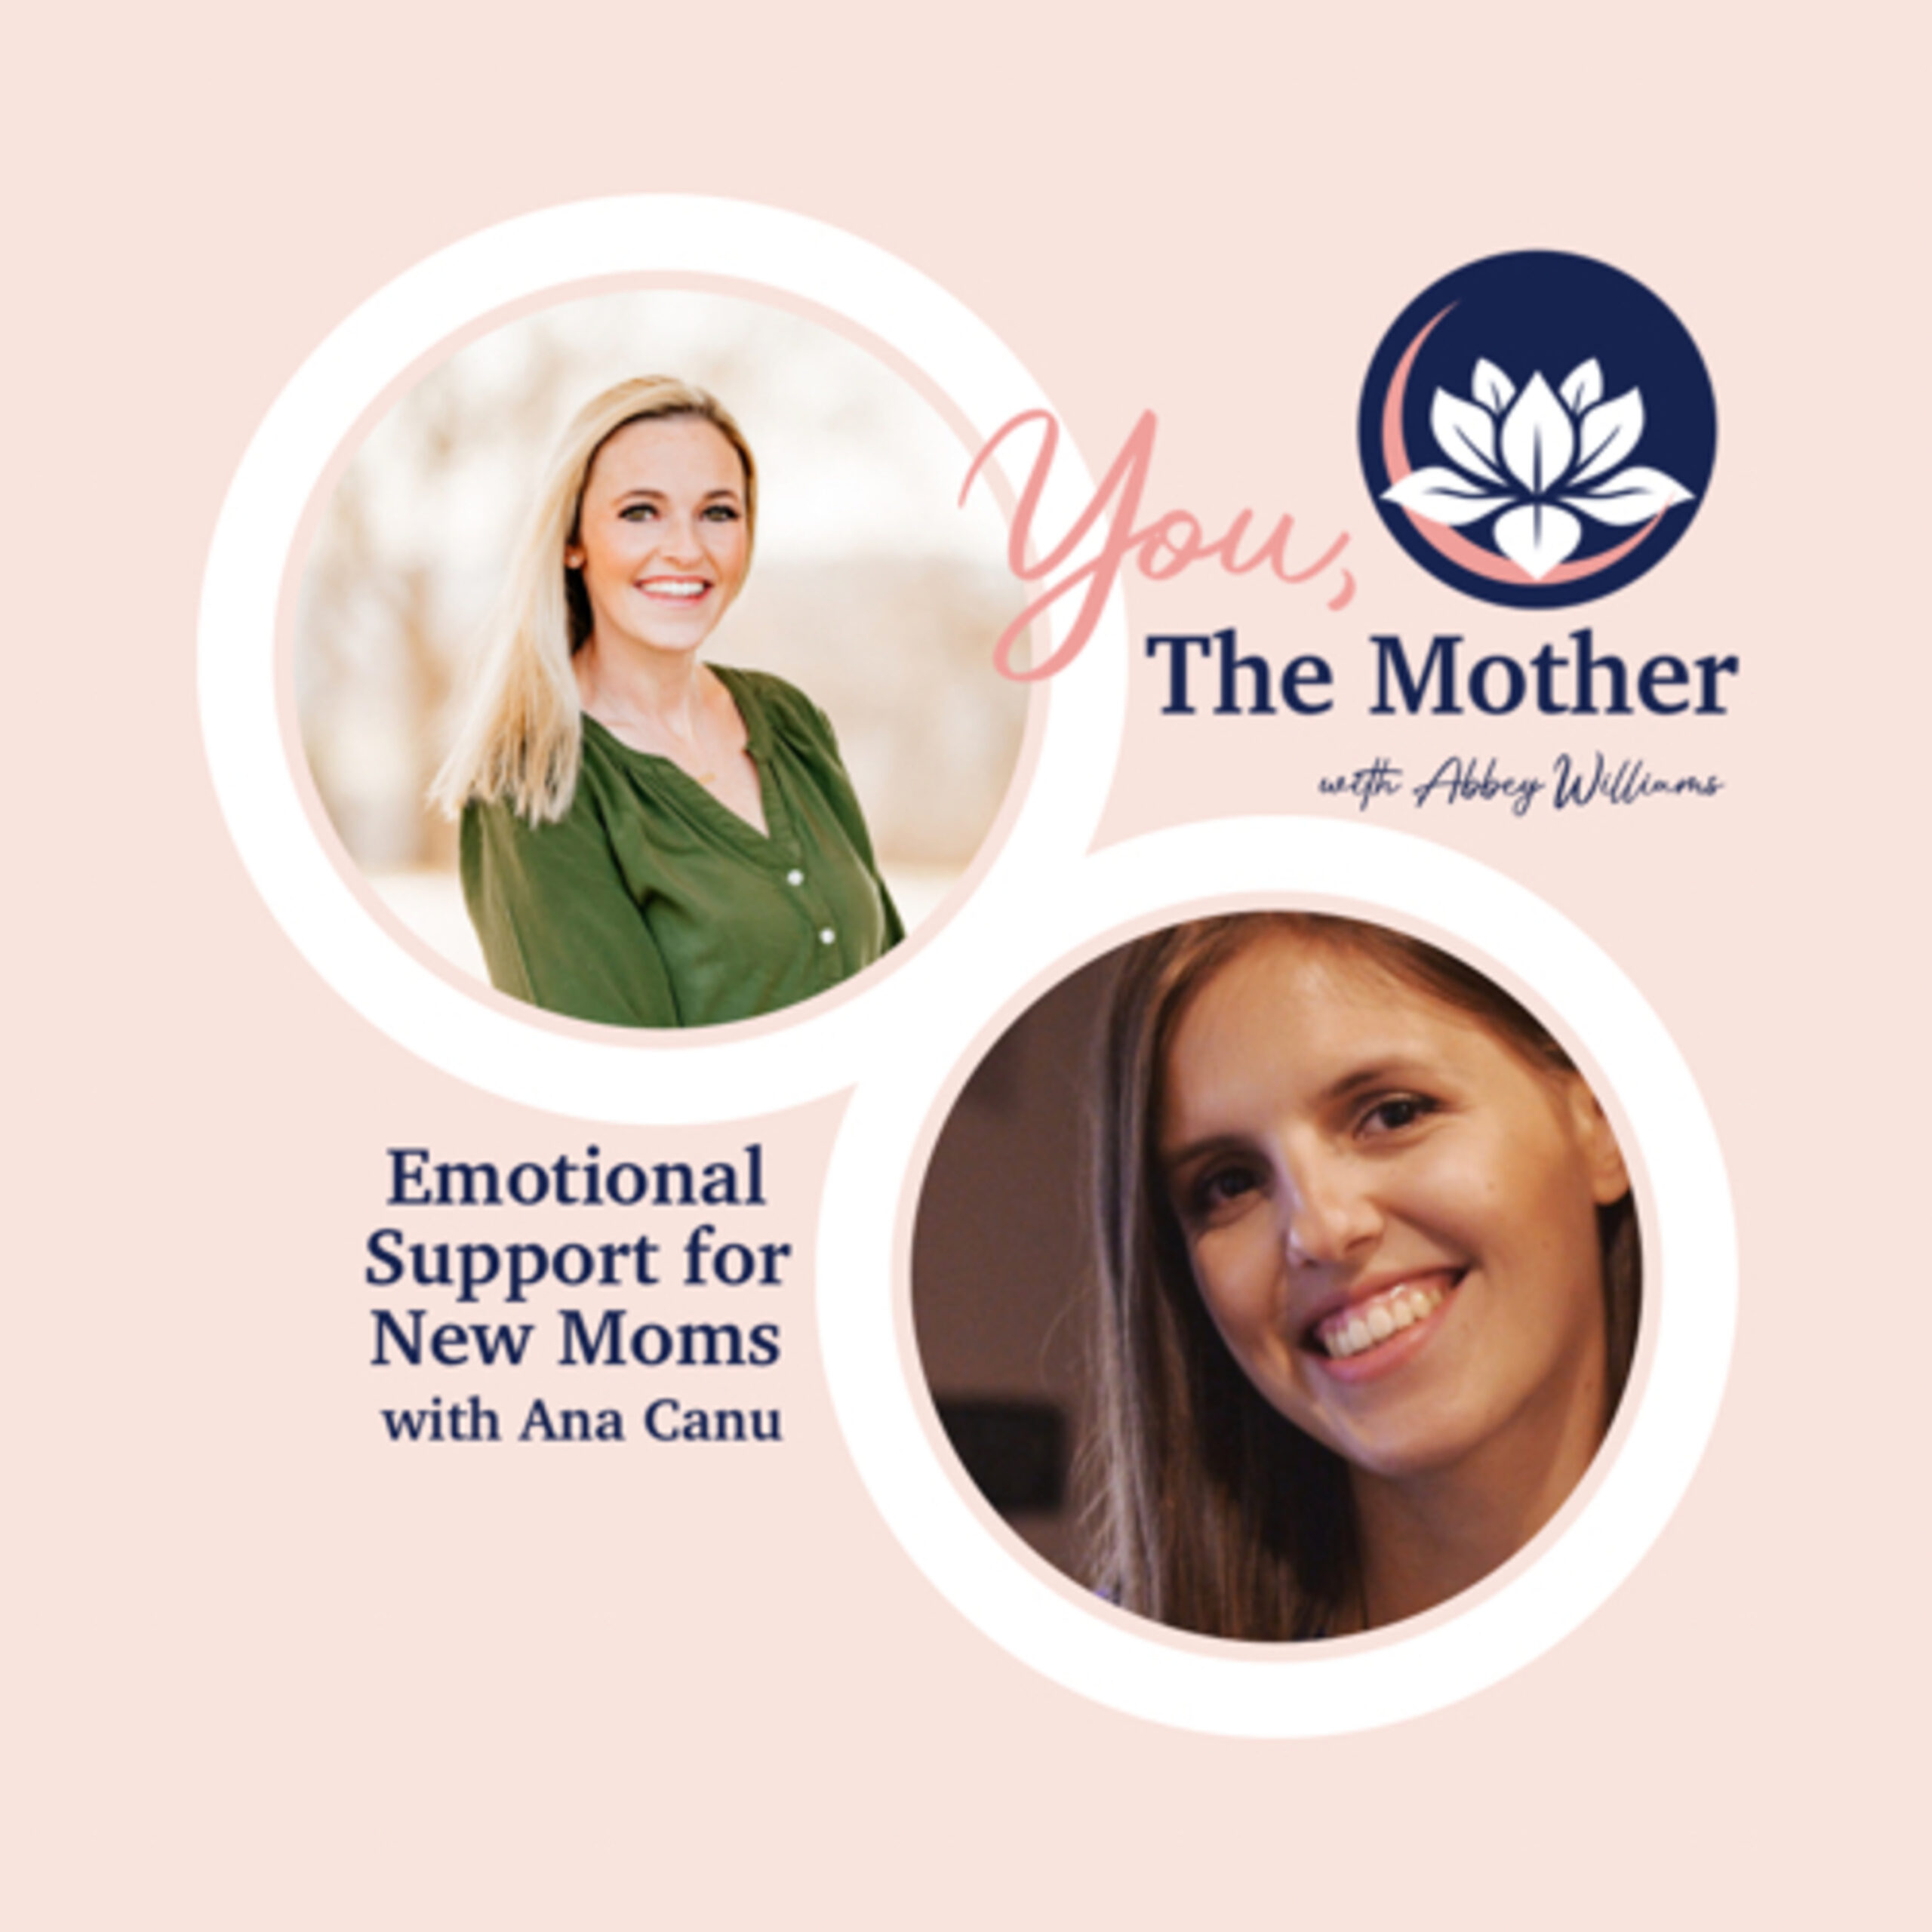 Emotional Support for New Moms with Ana Canu